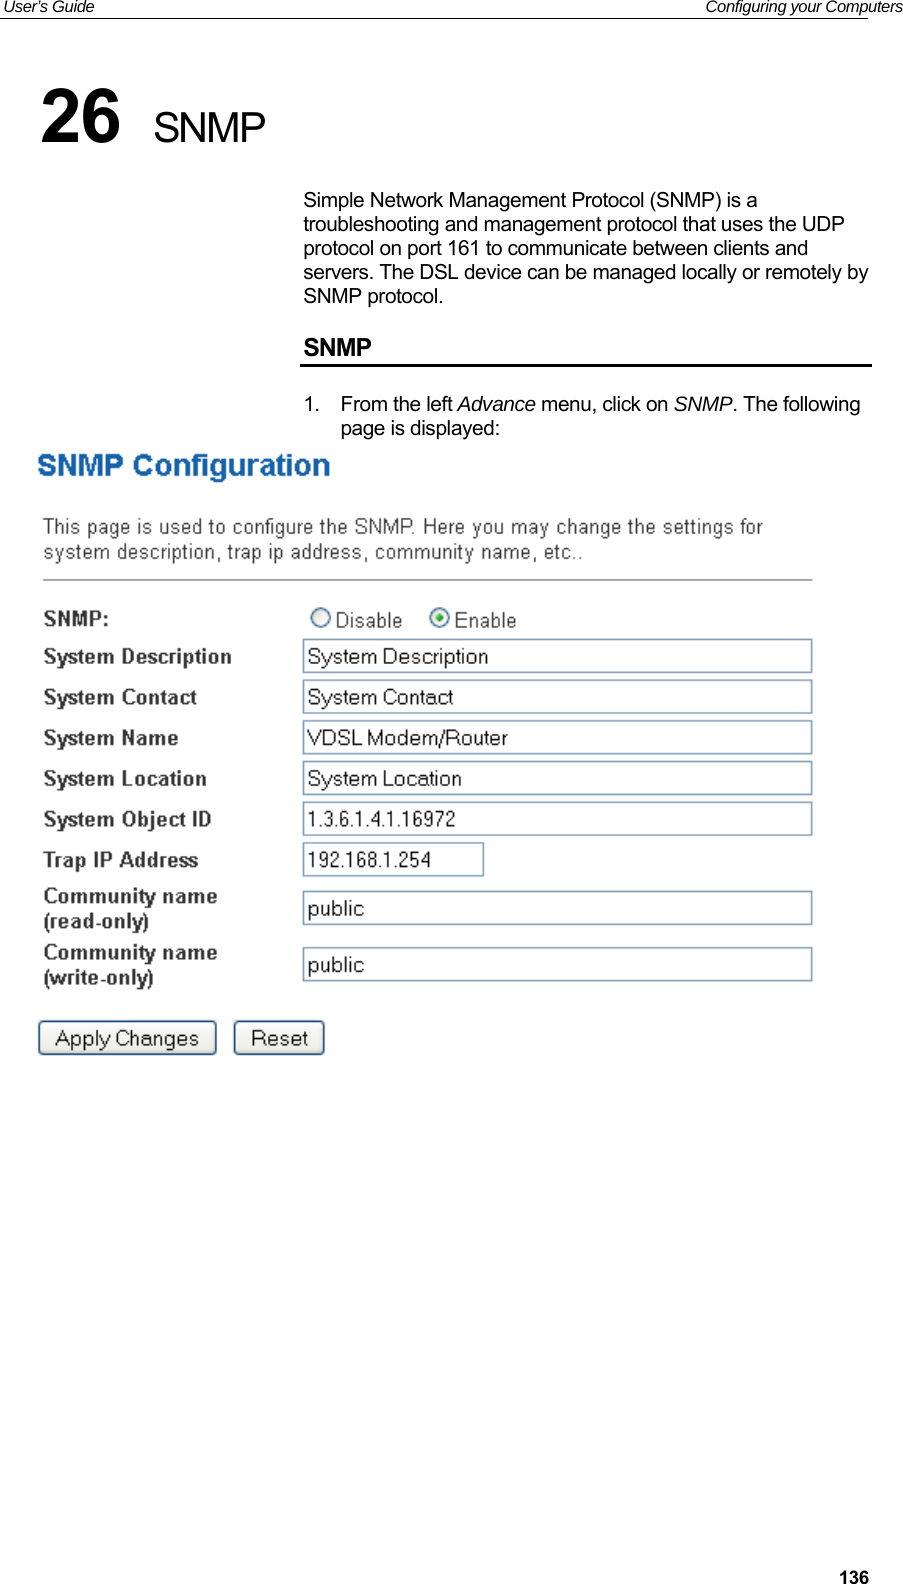 User’s Guide   Configuring your Computers  13626  SNMP Simple Network Management Protocol (SNMP) is a troubleshooting and management protocol that uses the UDP protocol on port 161 to communicate between clients and servers. The DSL device can be managed locally or remotely by SNMP protocol. SNMP 1.  From the left Advance menu, click on SNMP. The following page is displayed:              